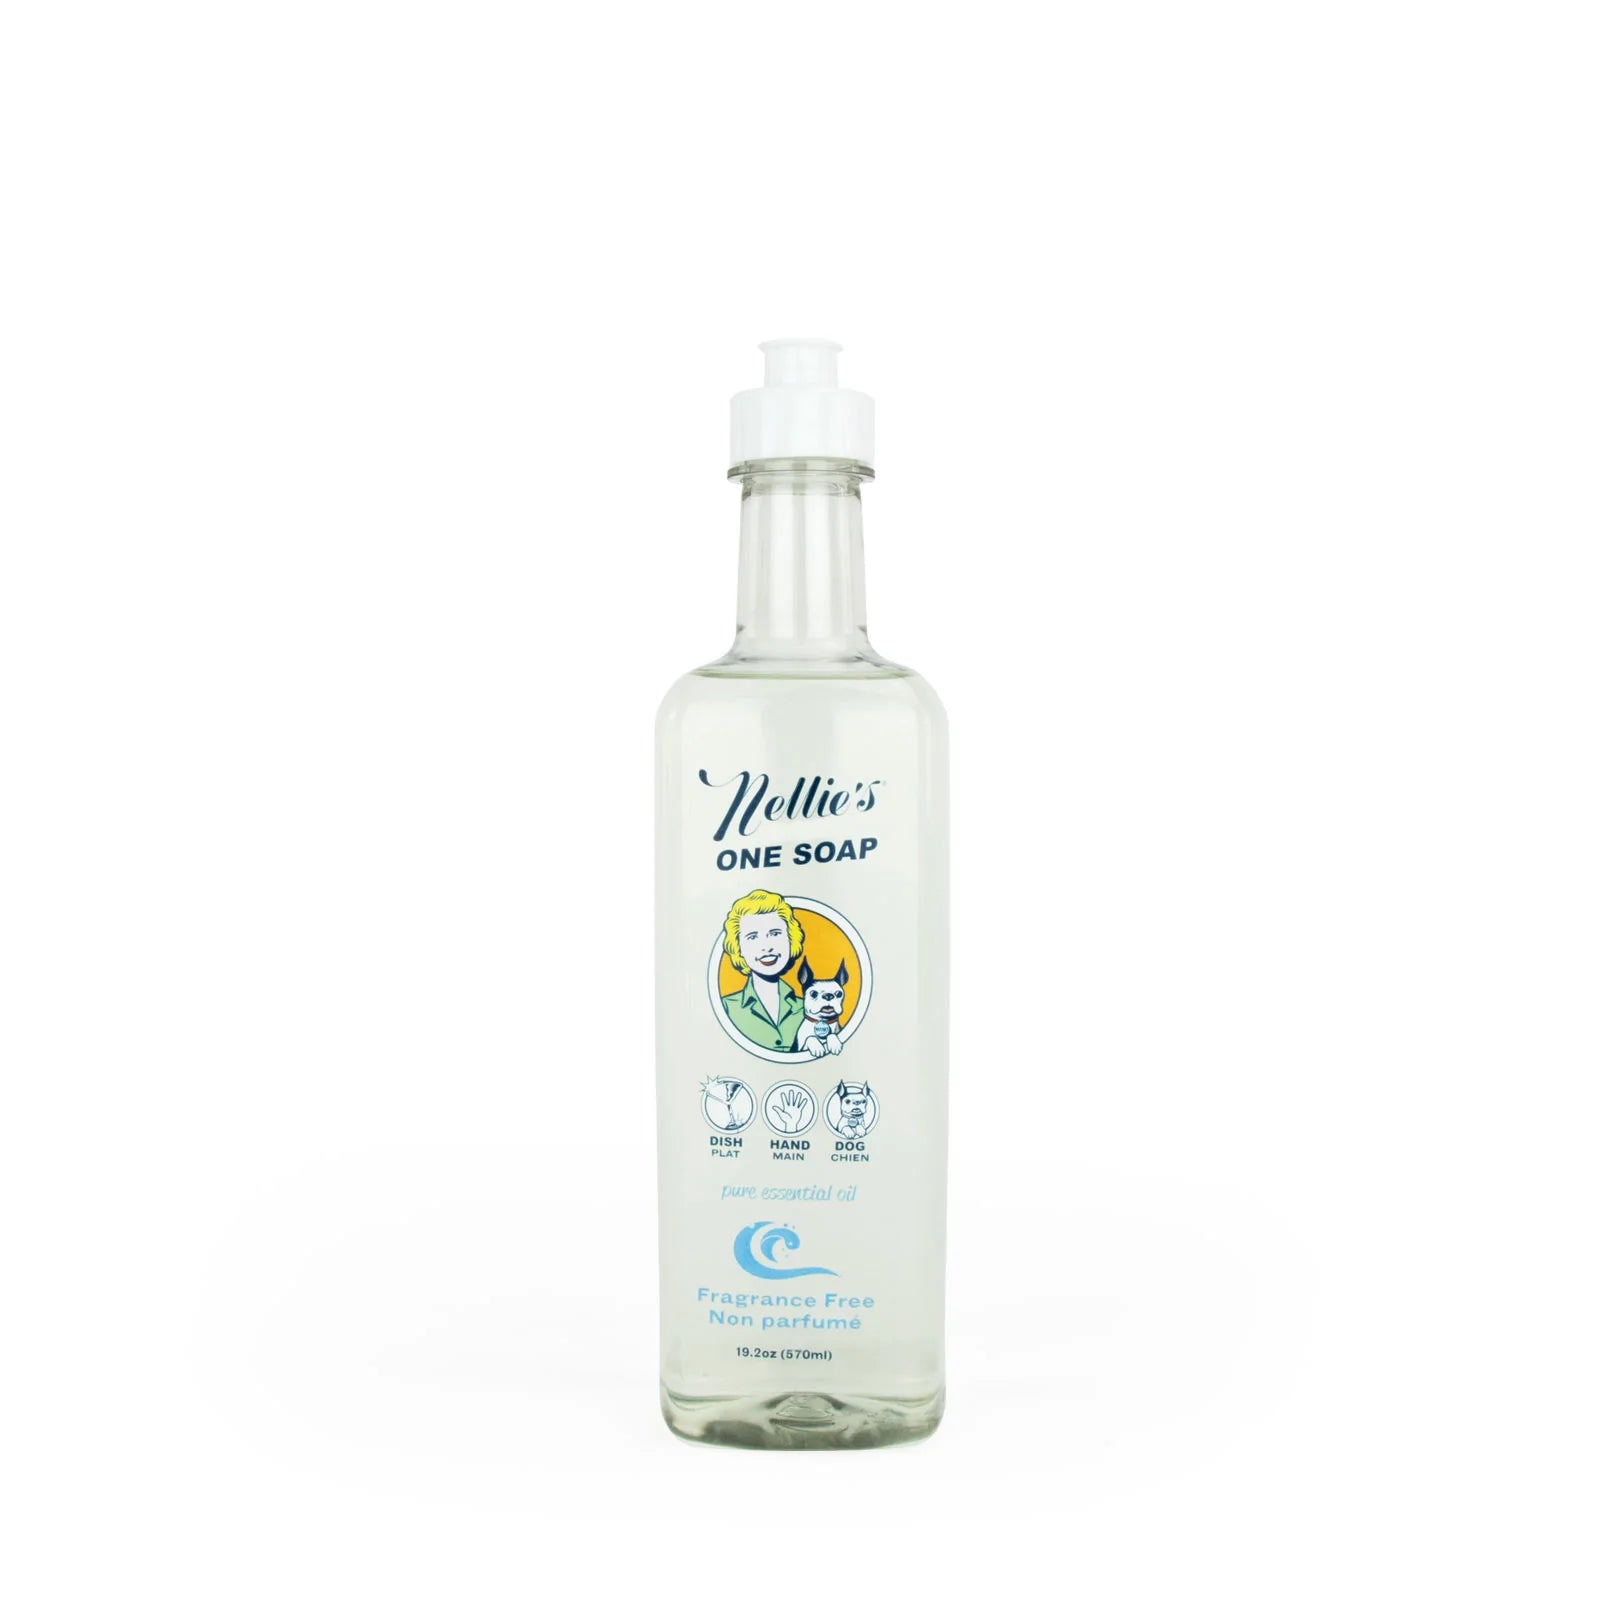 Nellie's One Soap - Fragrance Free (570ml)